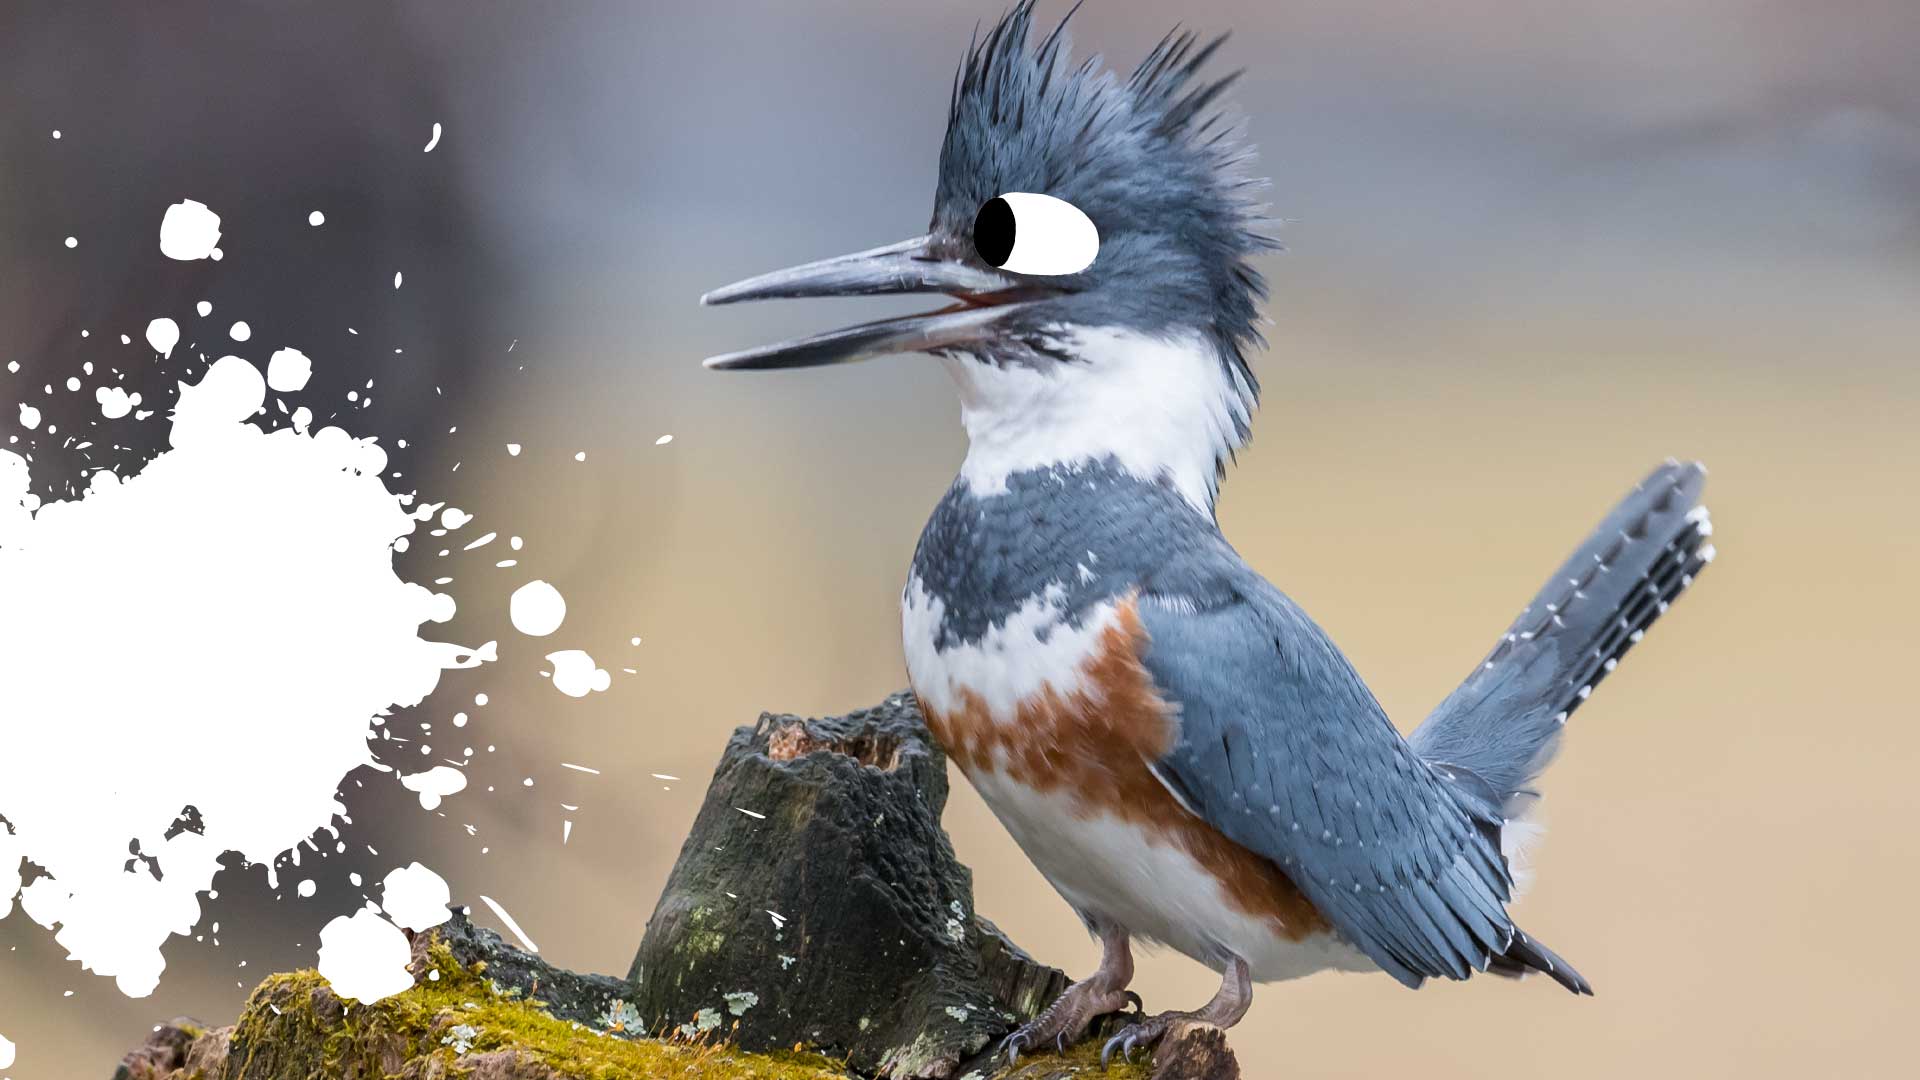  A belted kingfisher